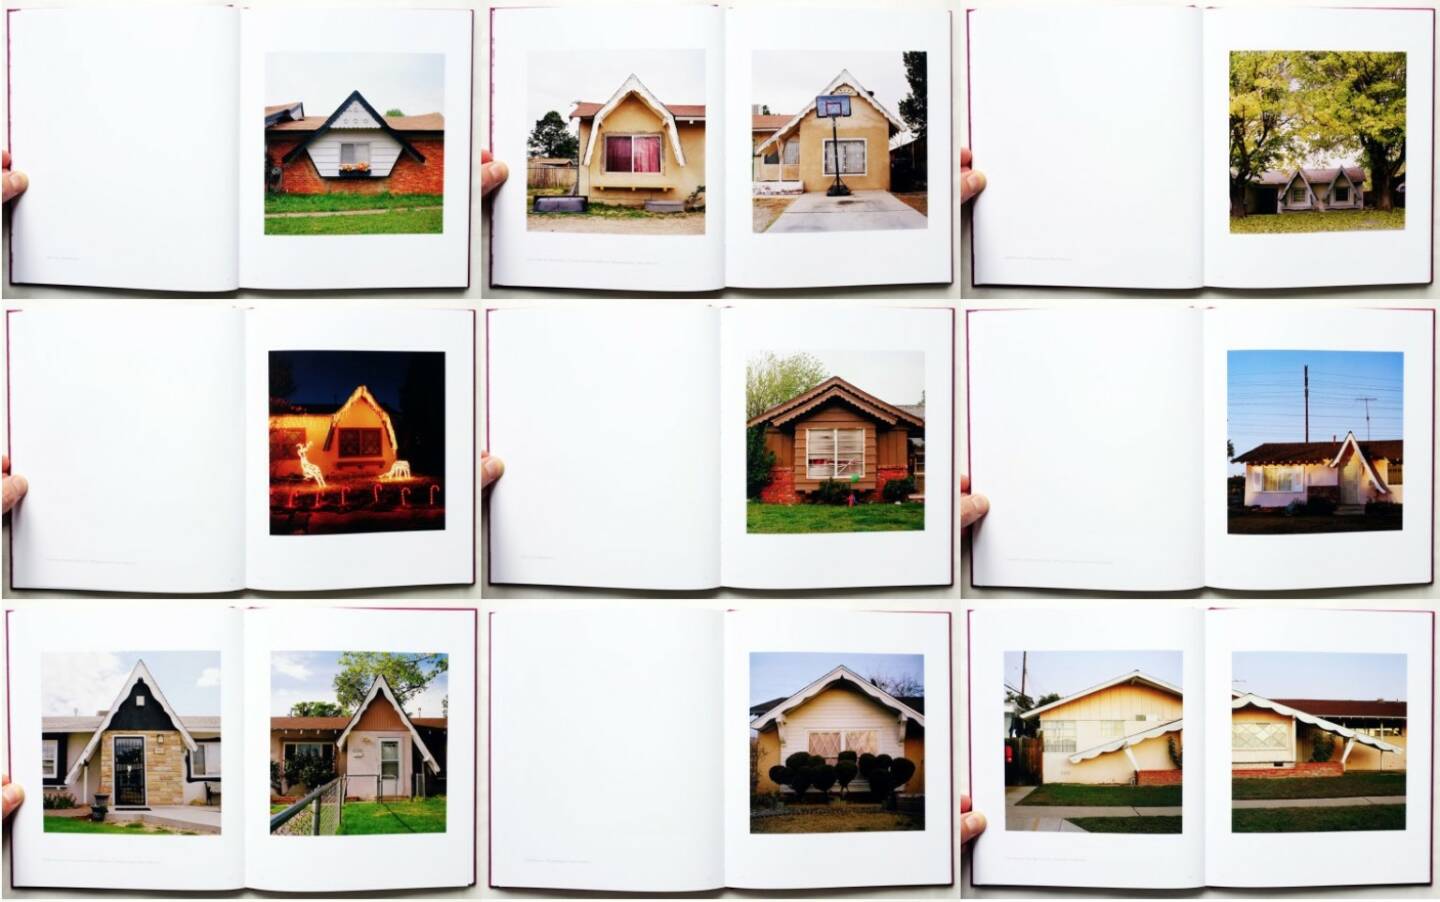 KayLynn Deveney - All You Can Lose is Your Heart, Kehrer 2015, Beispielseiten, sample spreads - http://josefchladek.com/book/kaylynn_deveney_-_all_you_can_lose_is_your_heart